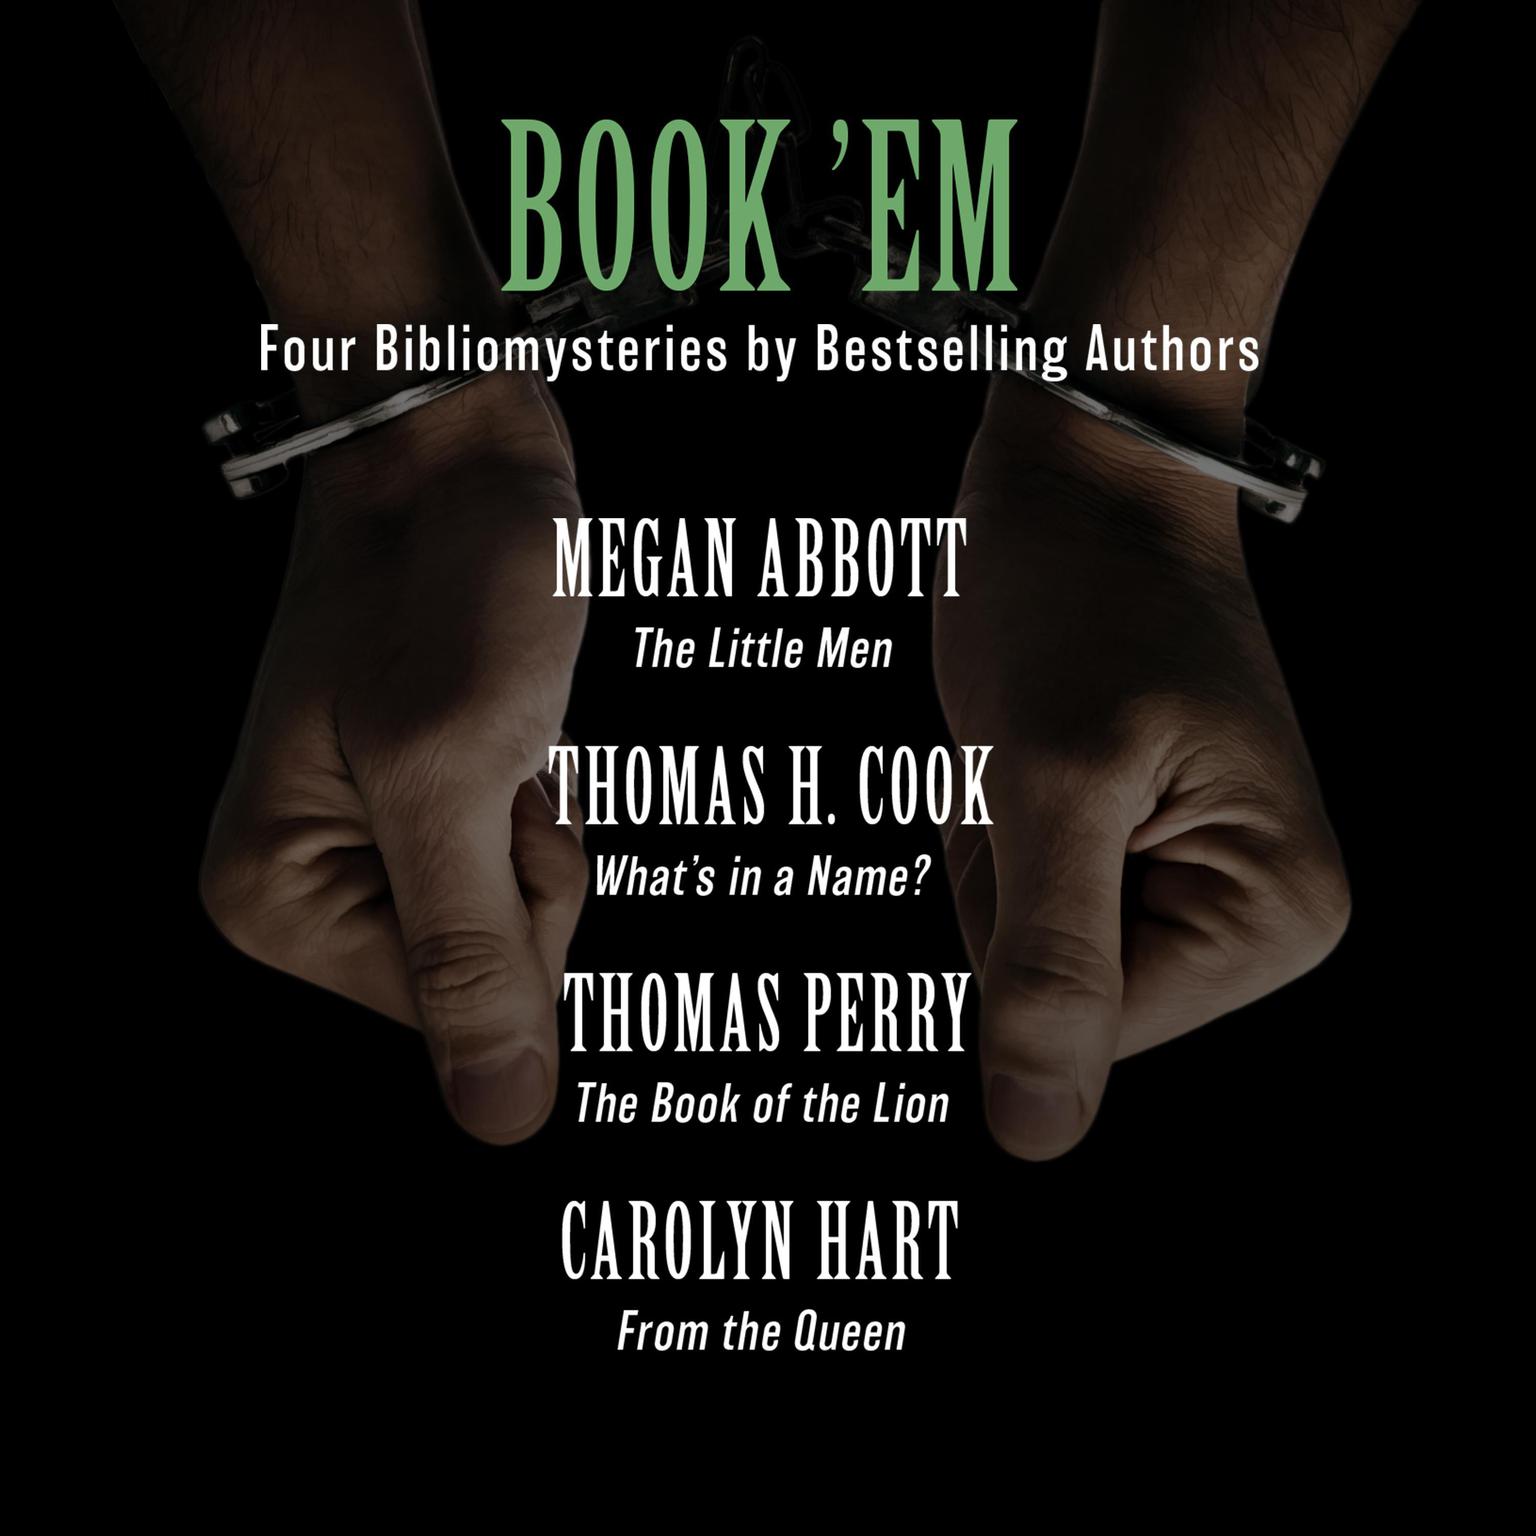 Book Em: Four Bibliomysteries by Edgar Award-Winning Authors Audiobook, by Thomas Perry